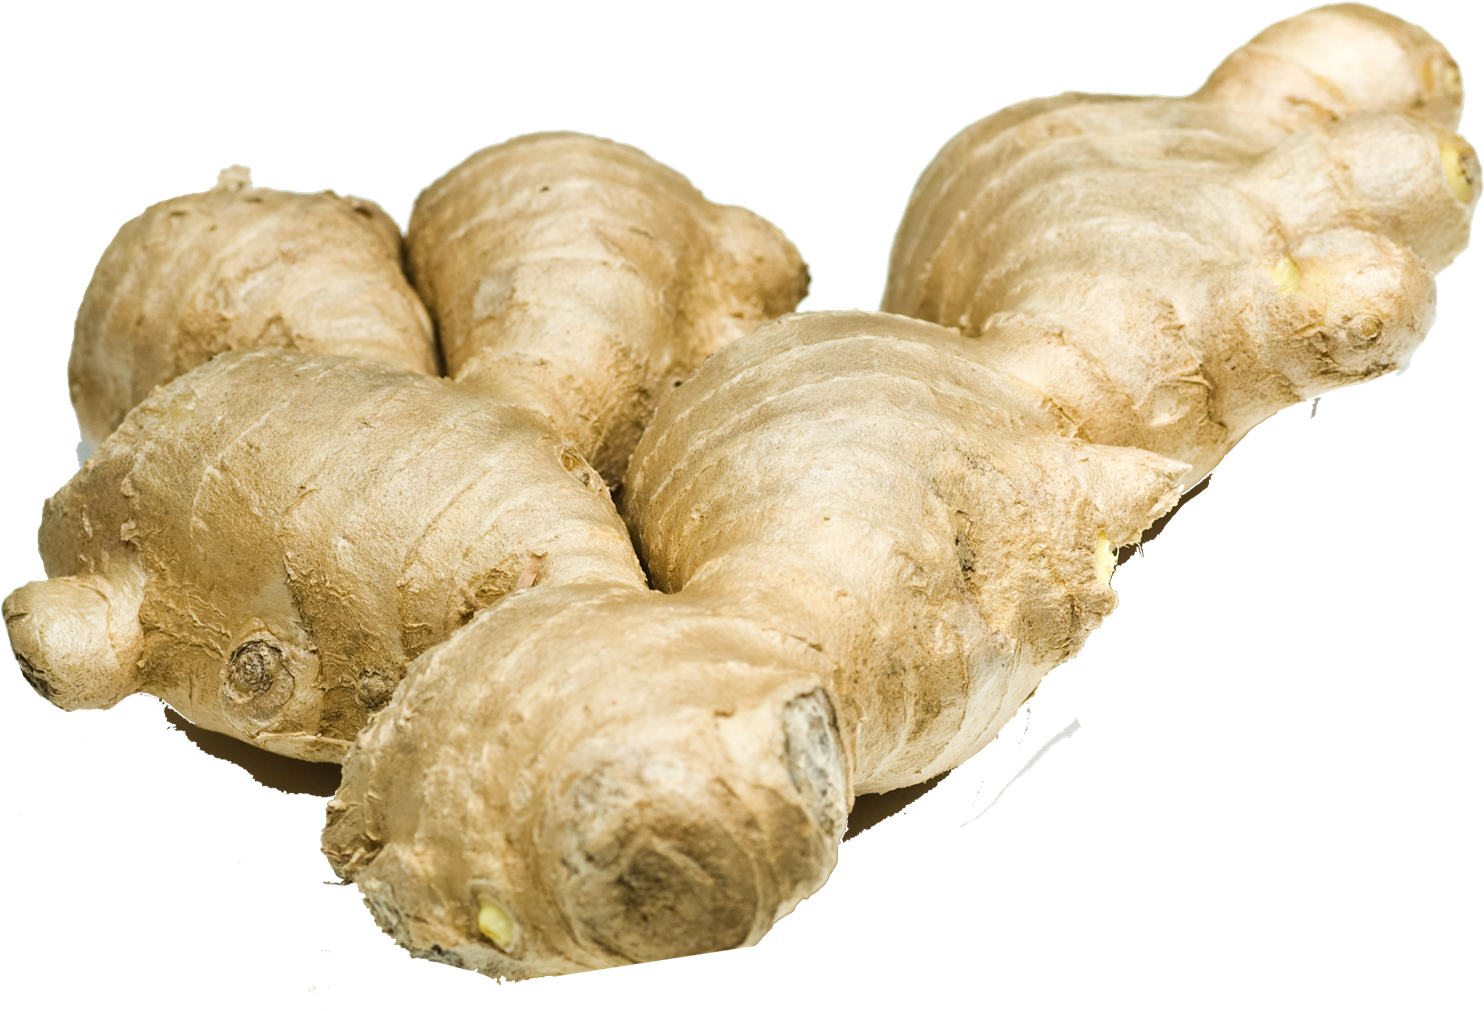 A Group Of Ginger Root